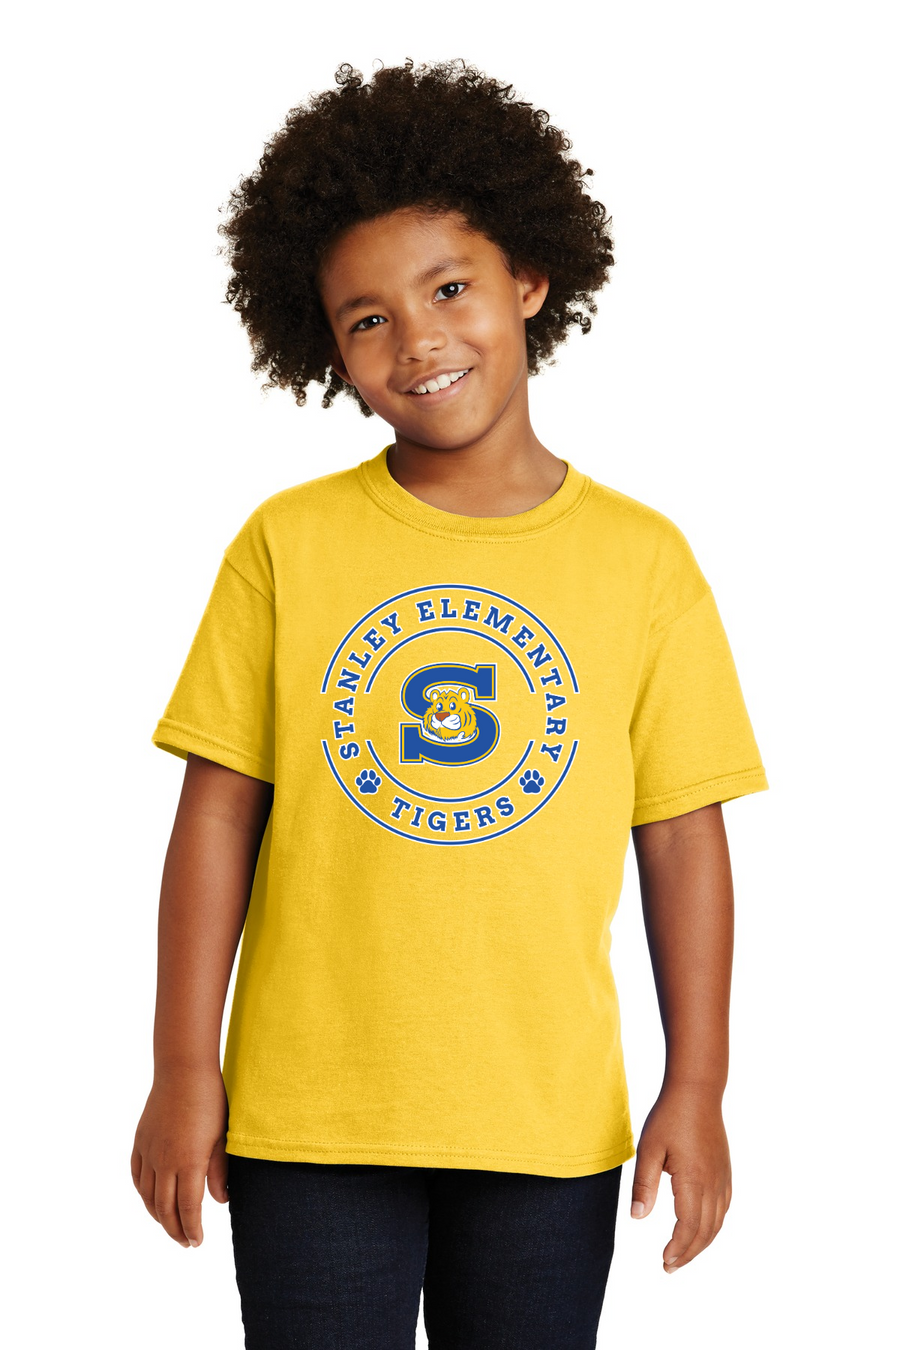 The Tiger Store - Stanley Elementary 2023/24-Unisex T-Shirt Circle Logo